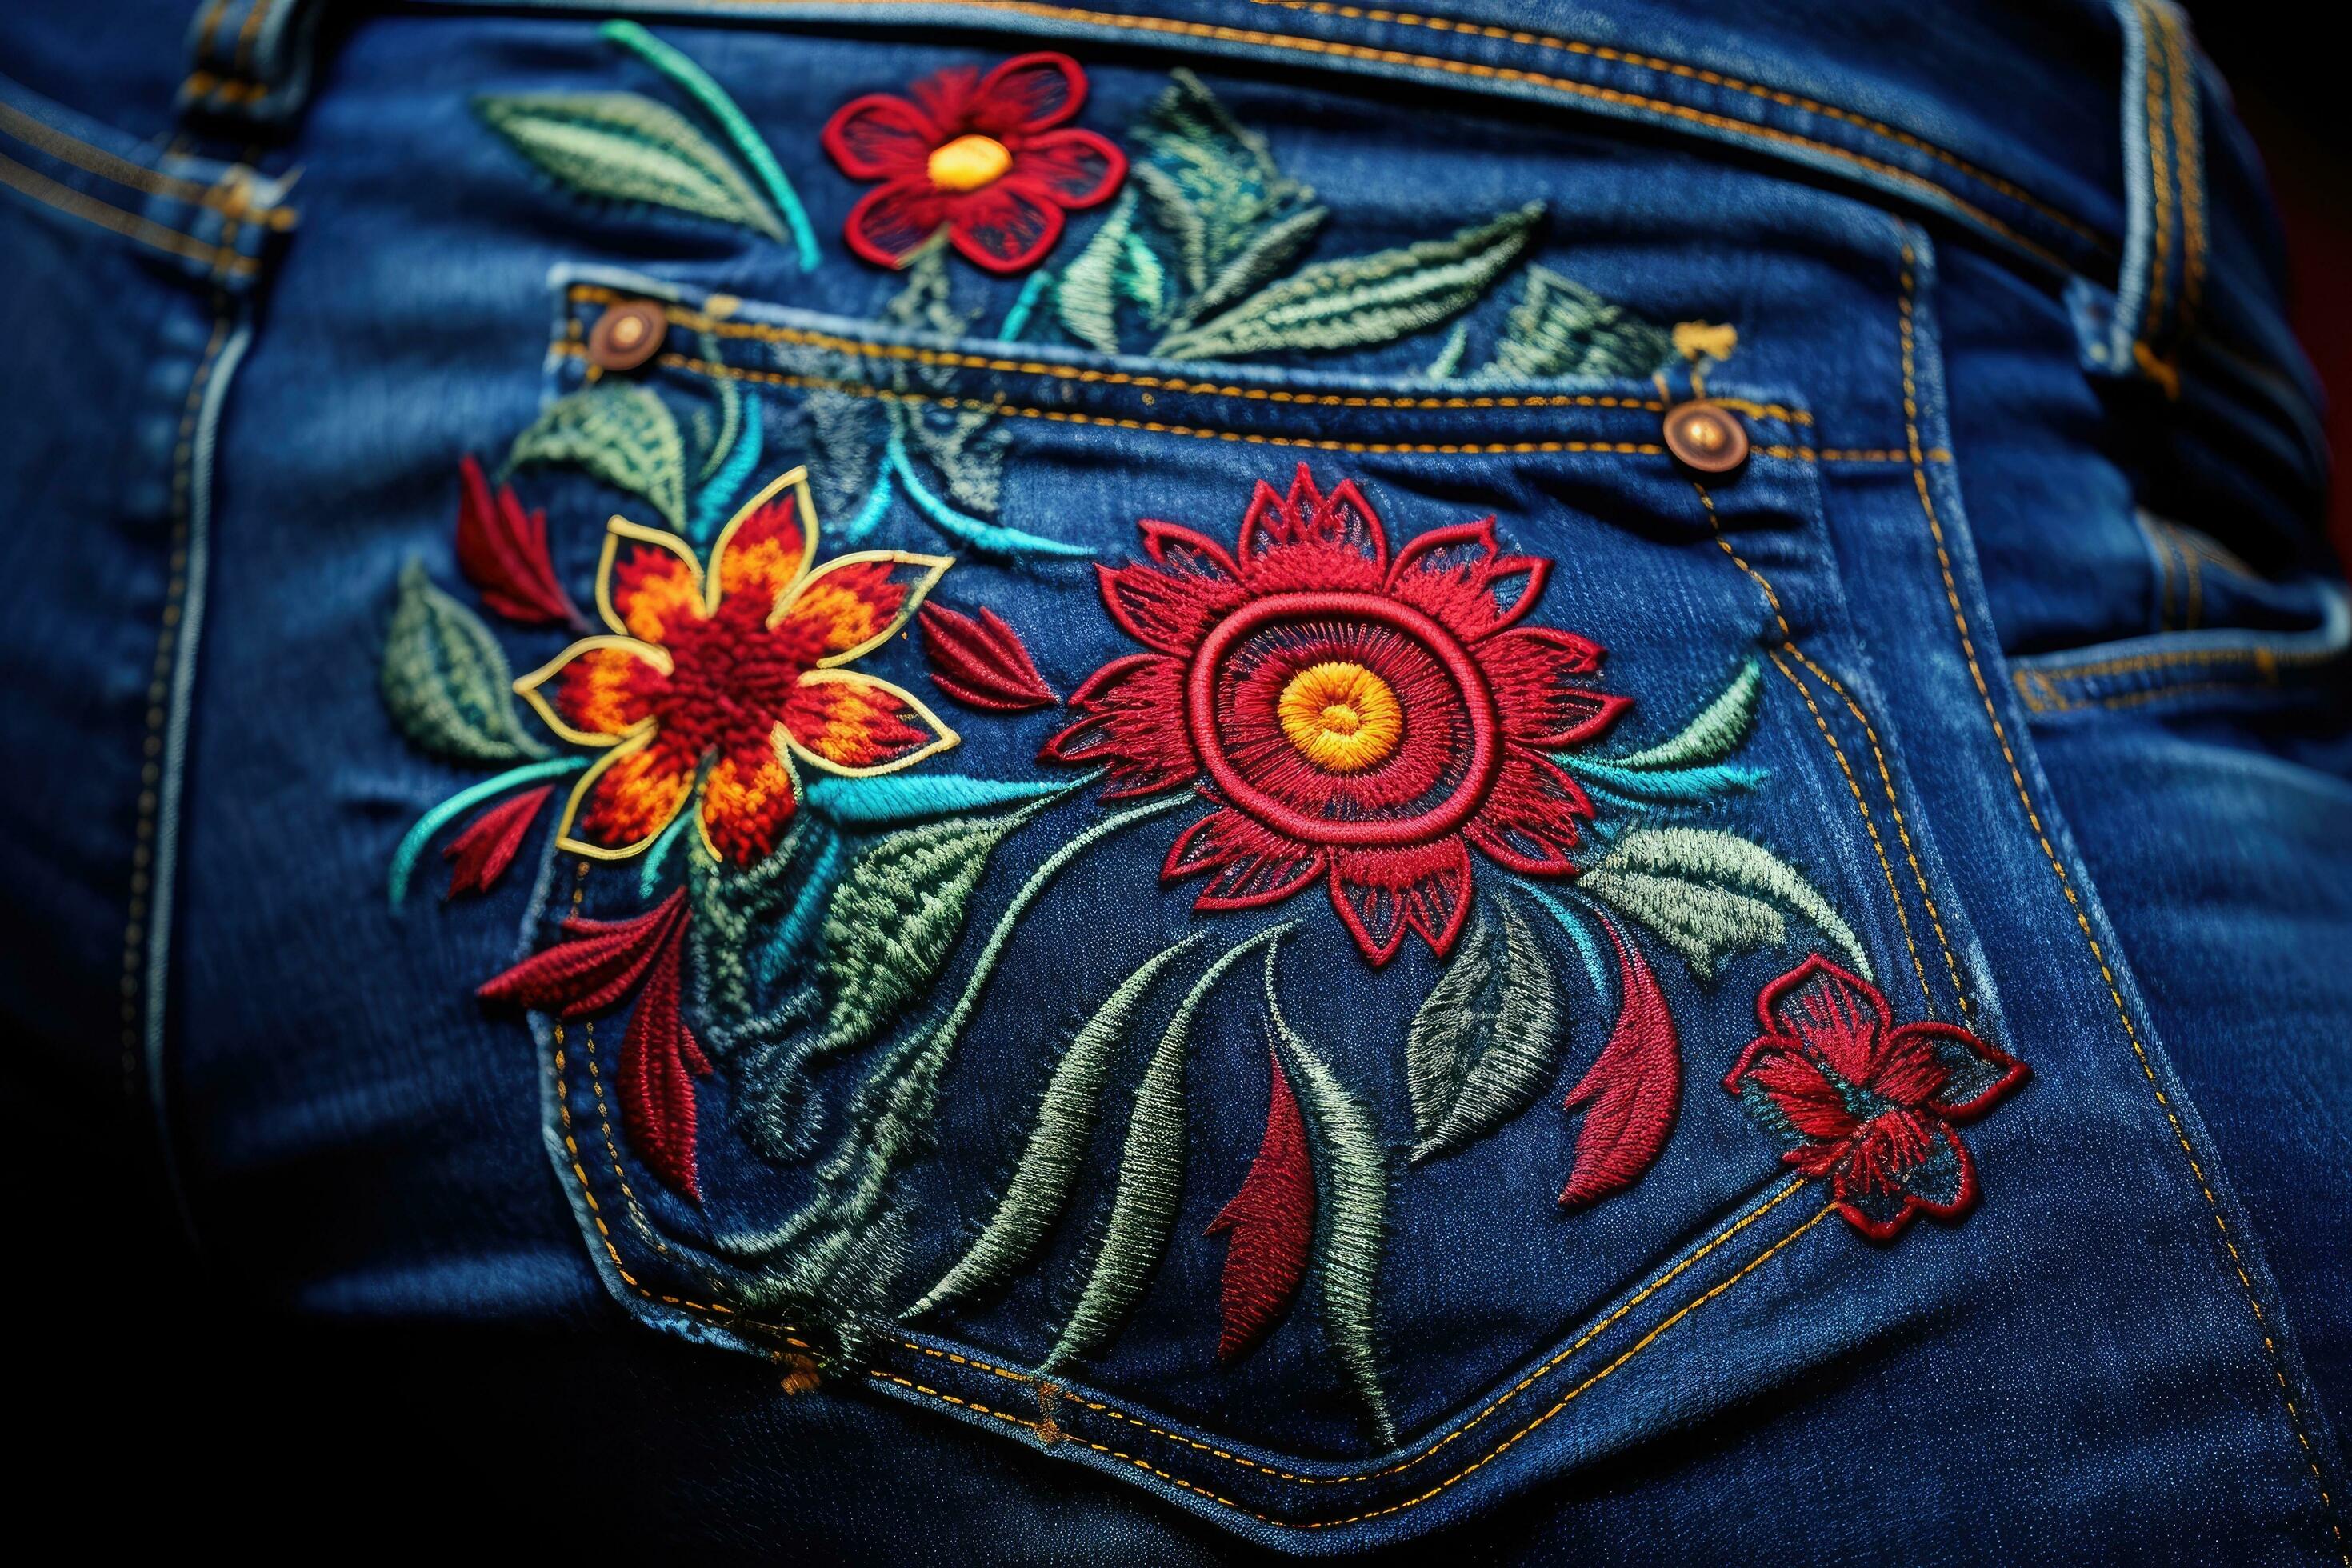 https://static.vecteezy.com/system/resources/previews/032/189/711/large_2x/colorful-embroidery-on-the-back-pocket-of-blue-jeans-embroidery-floral-abstract-fantasy-design-luxury-denim-blue-jeans-ai-generated-free-photo.jpg